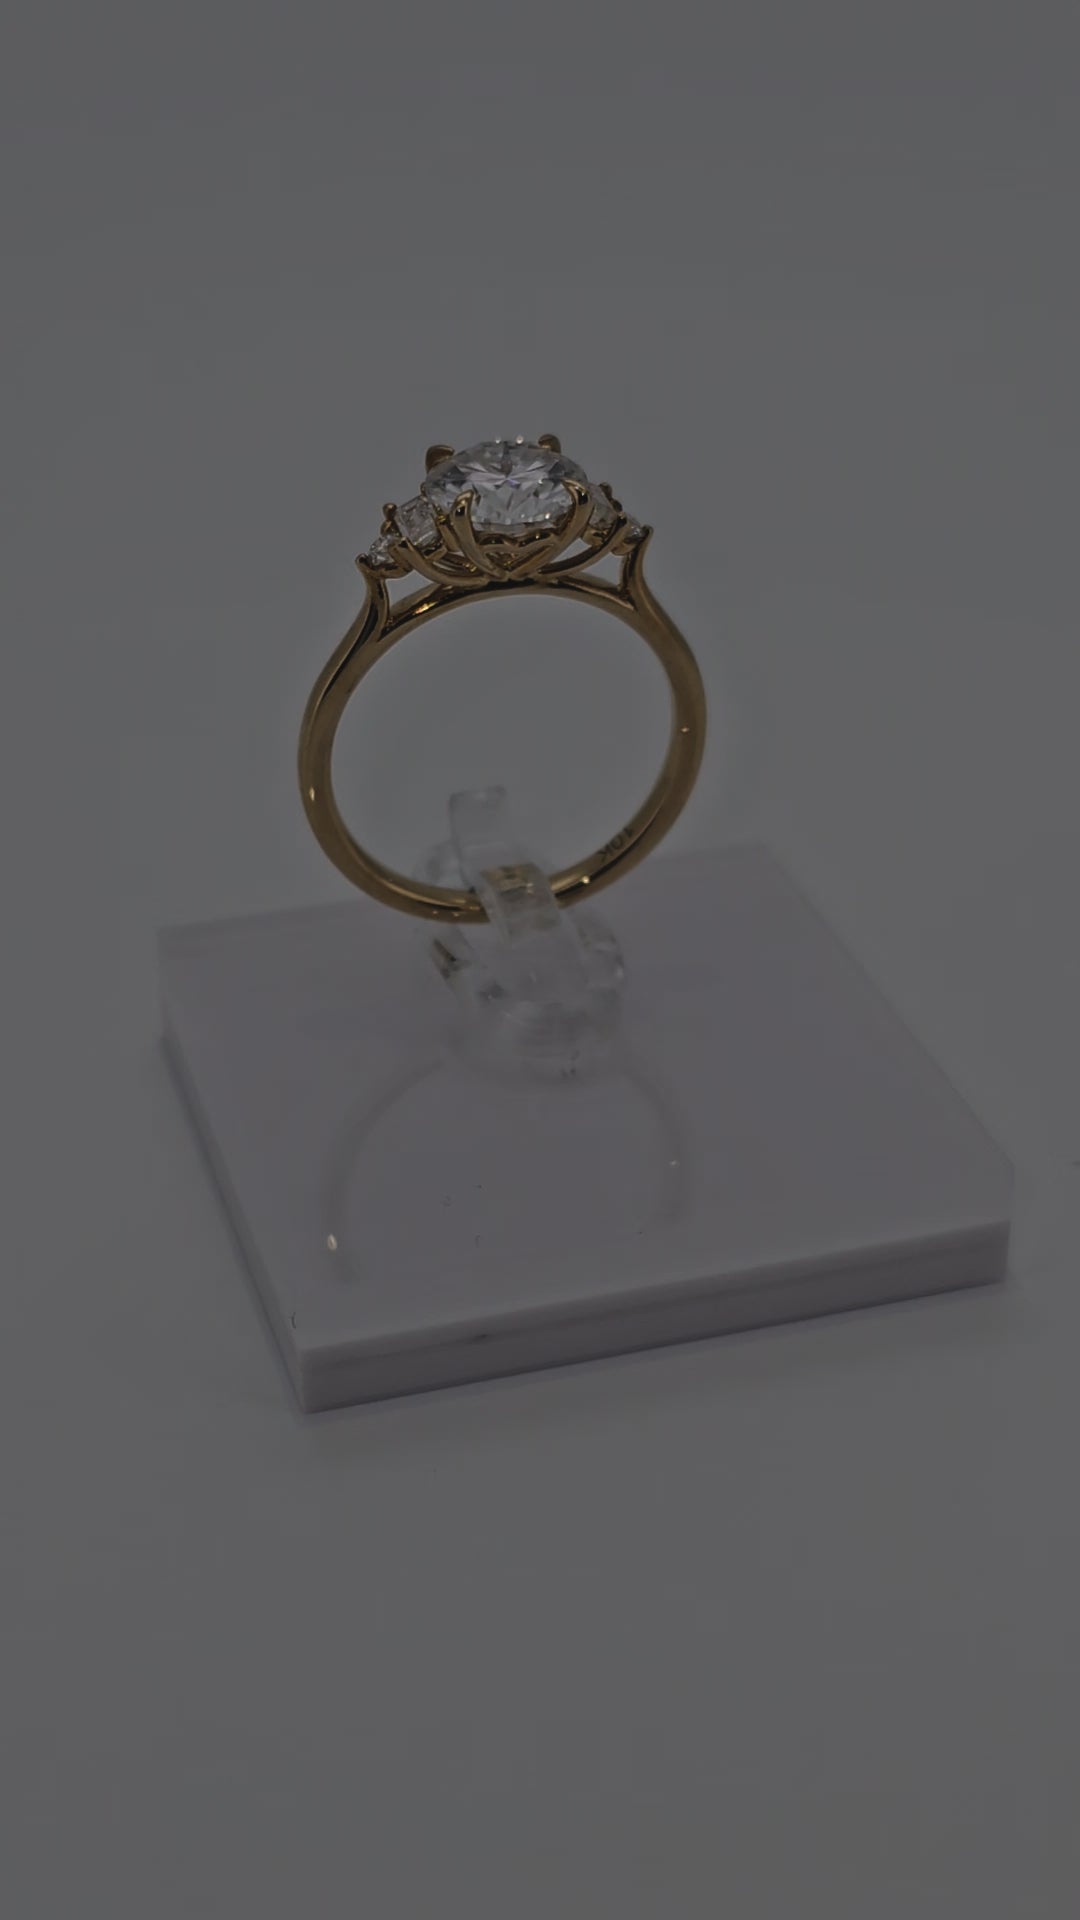 Video of Beautiful 10 Karat Solid Gold Round Cut Diamond and Baguette Ring from Boujee Ice